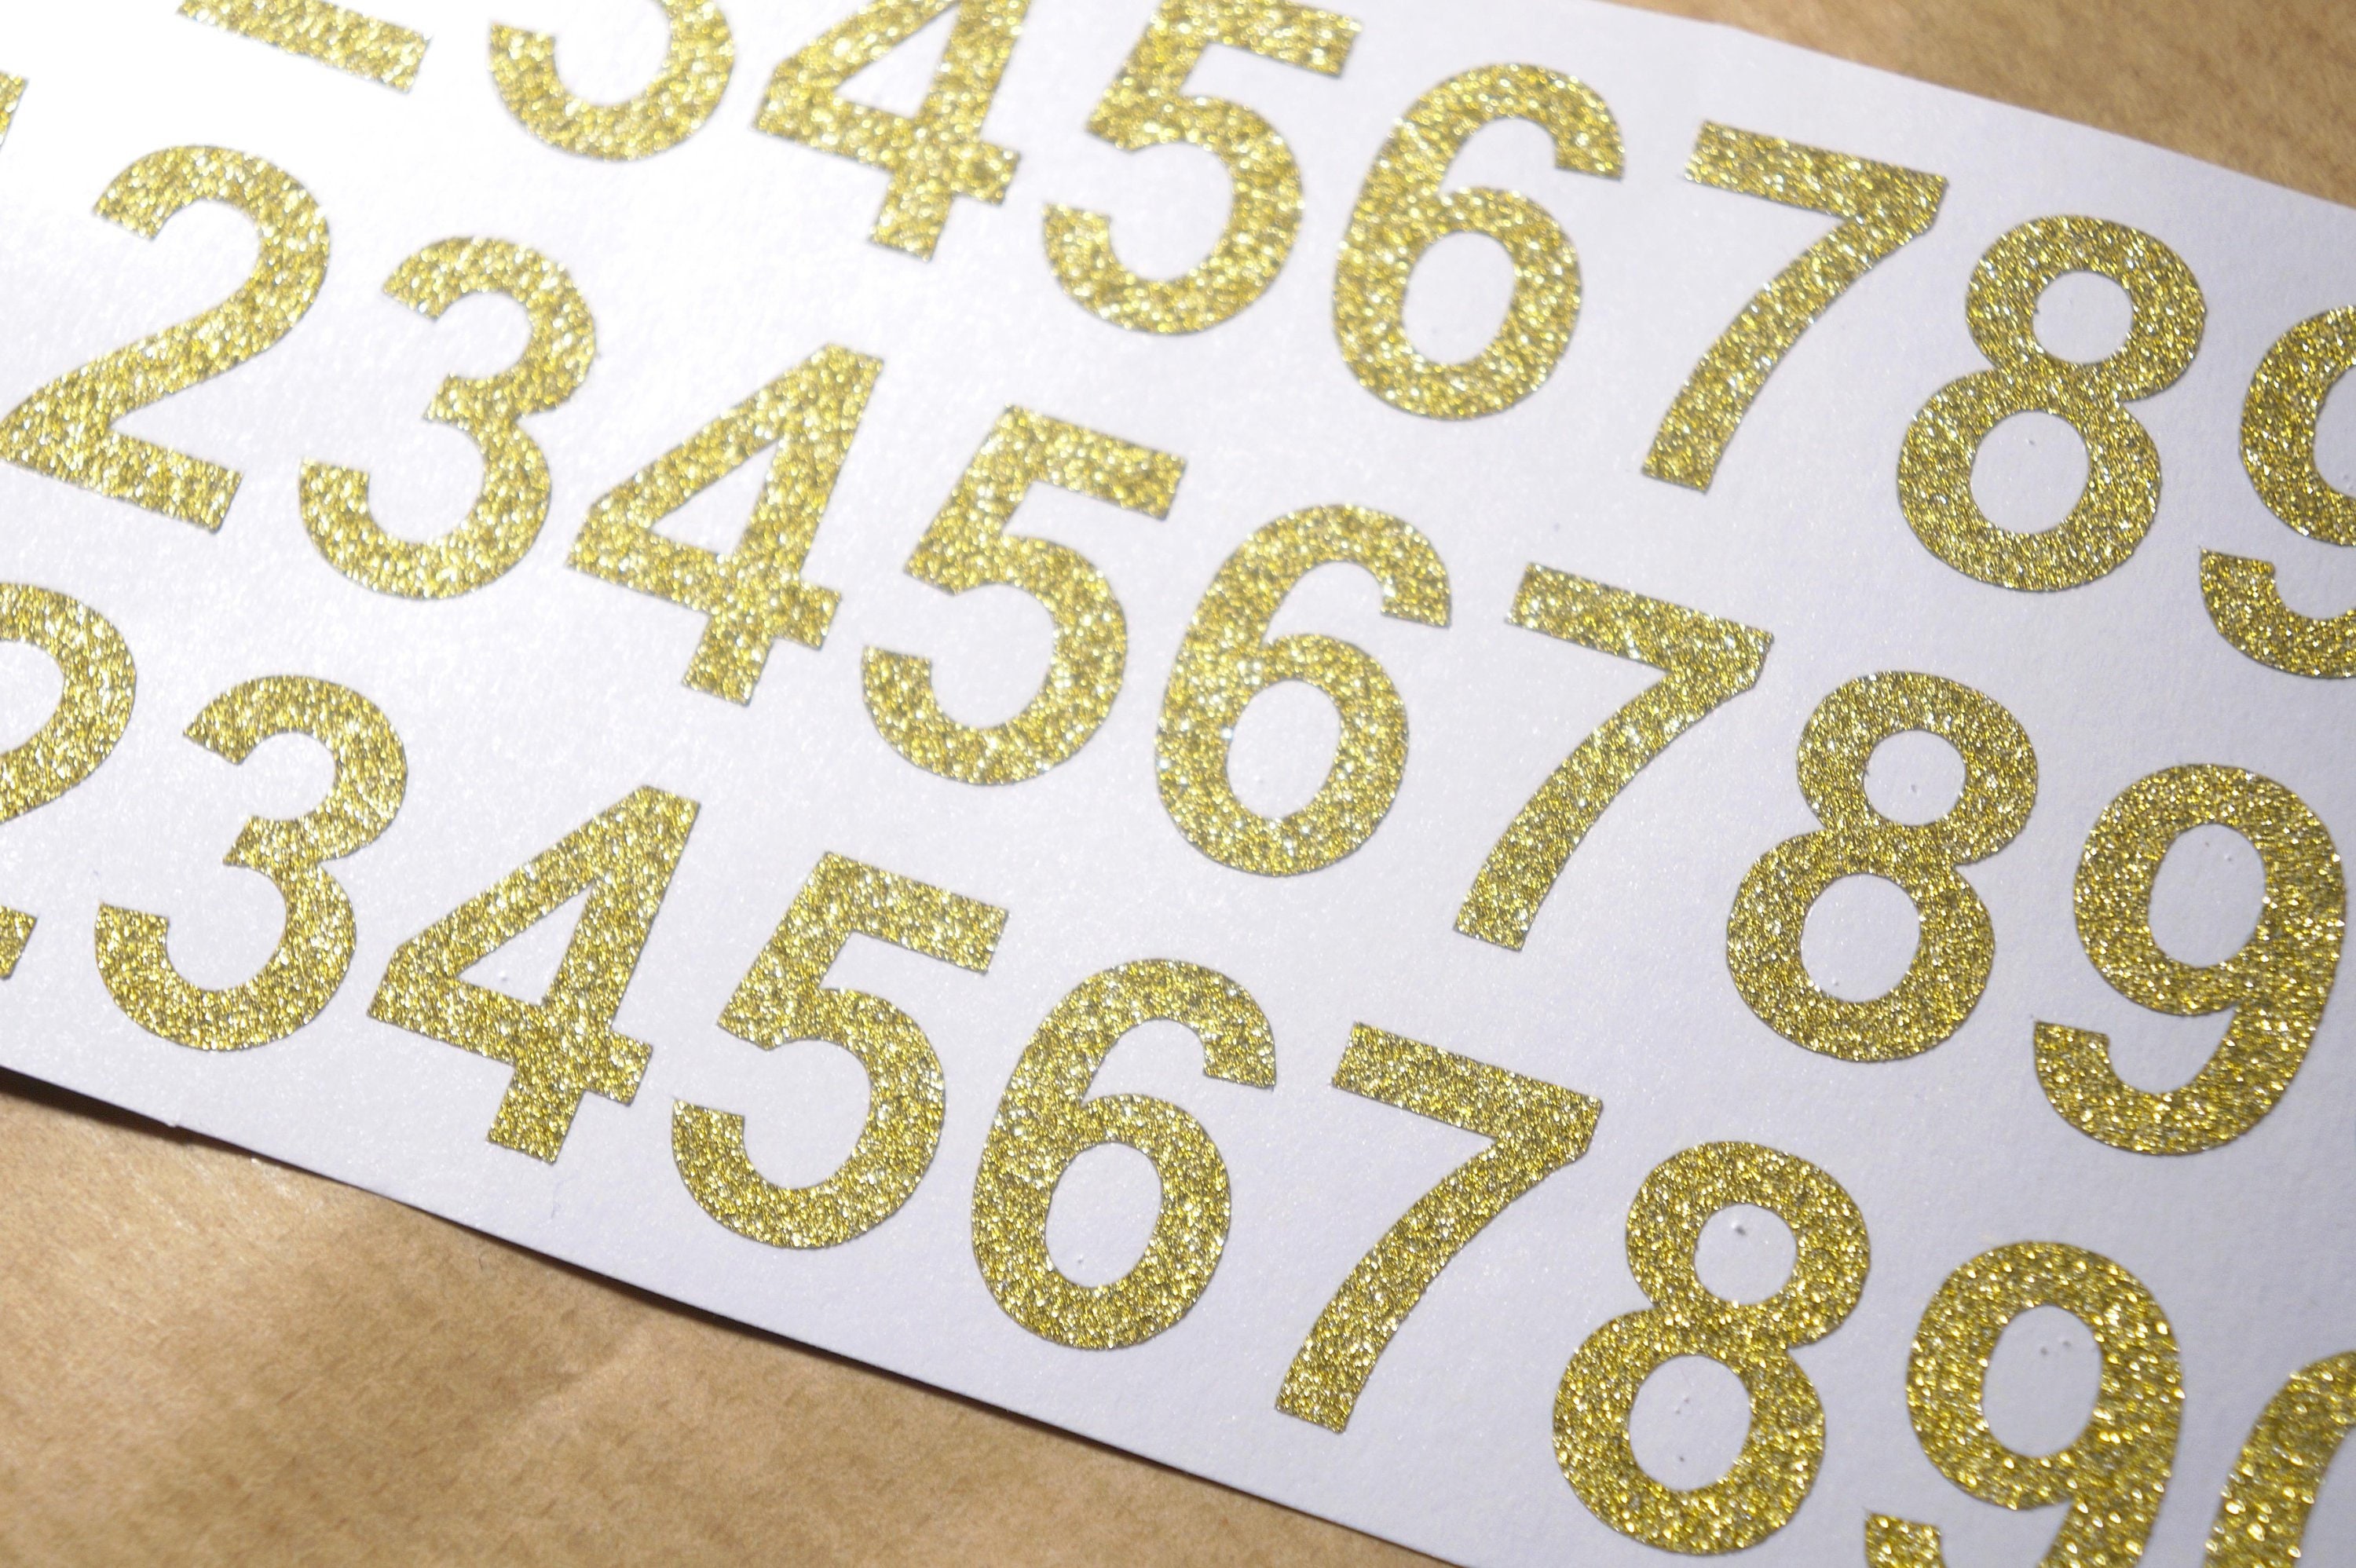 1x NUMBERS OR LETTERS GOLD/SILVER STICKERS CRAFT CARD MAKING 17cmx9cm UK  SELLER